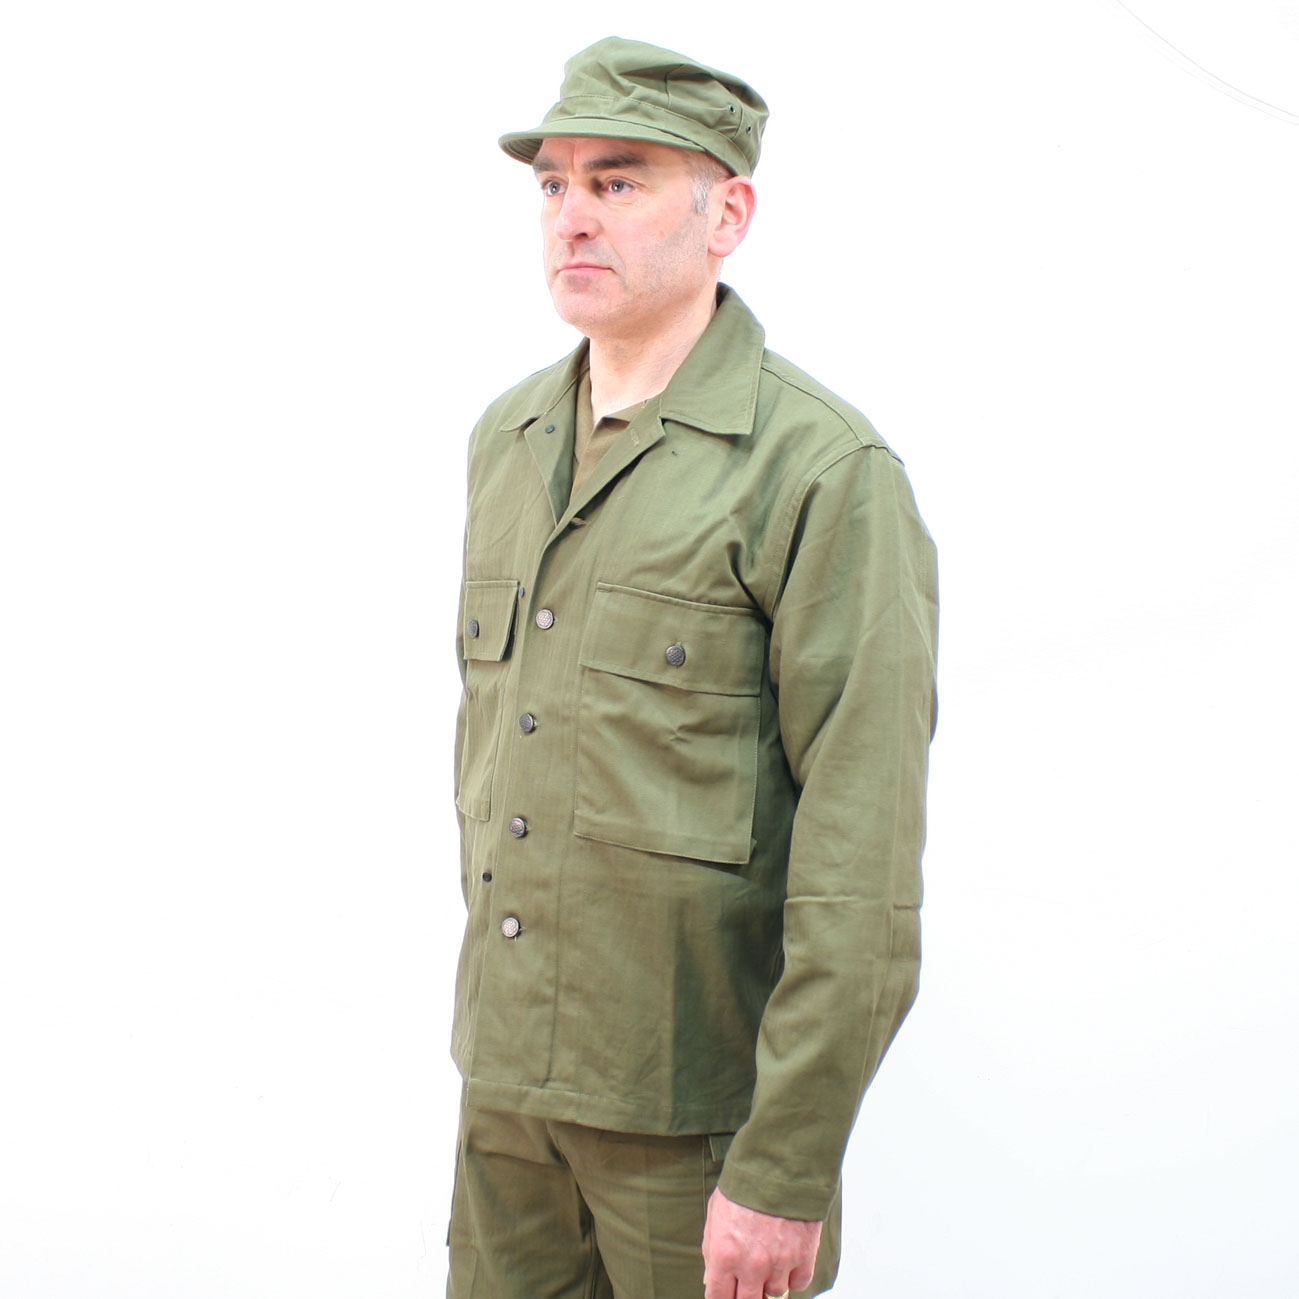 WWII WW2 US MILITARY ARMY GREEN HBT FIELD SHIRT COAT TACTICAL JACKET 